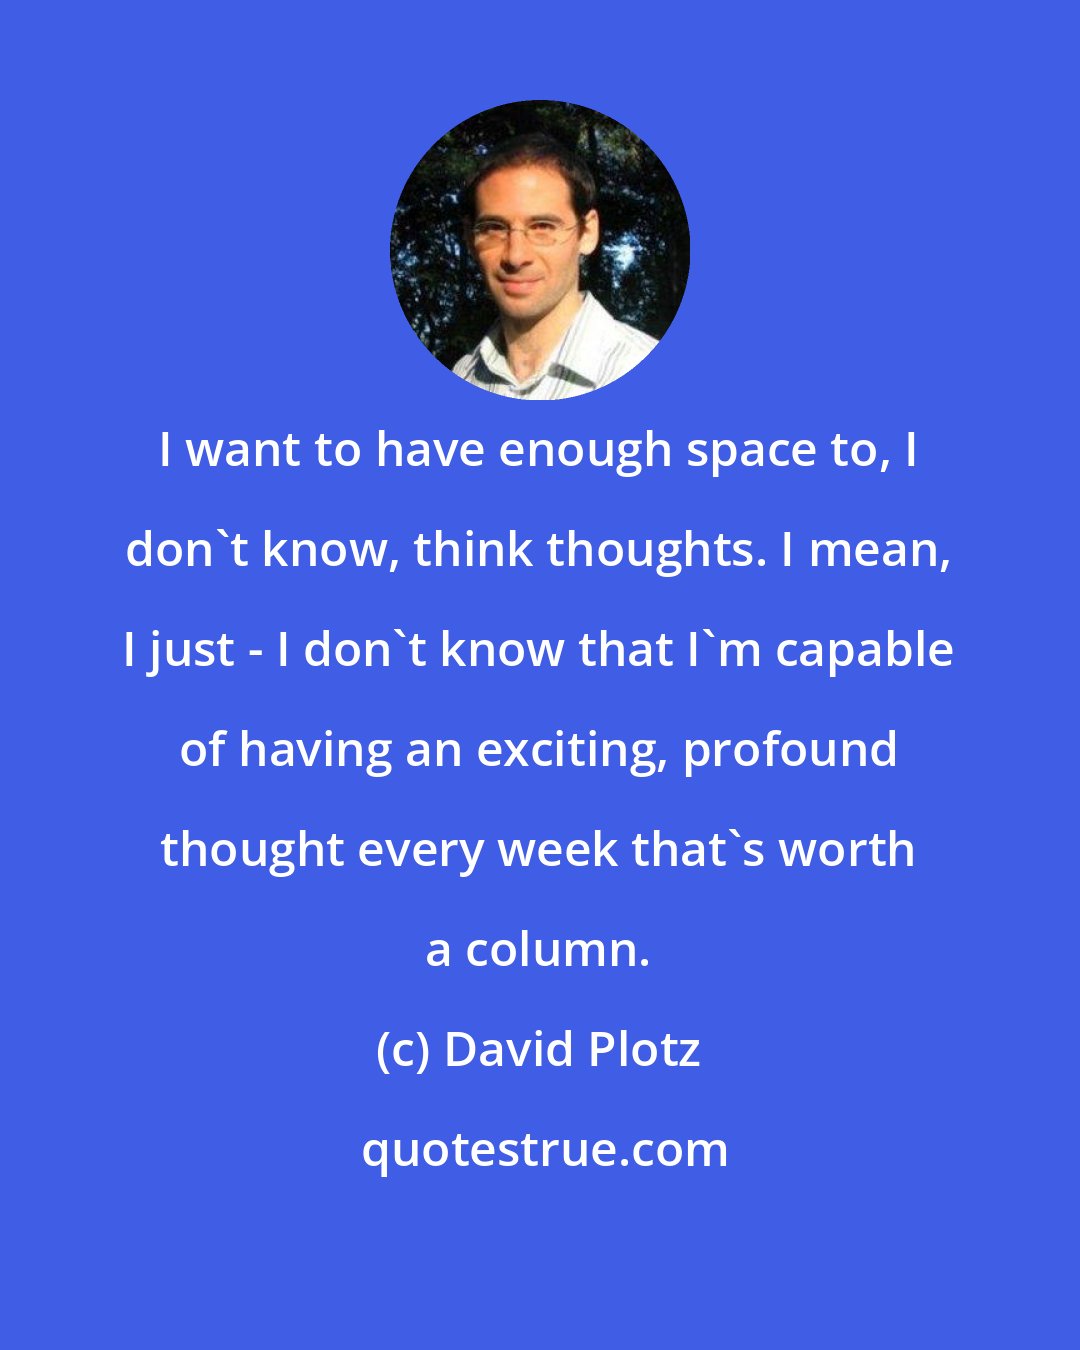 David Plotz: I want to have enough space to, I don't know, think thoughts. I mean, I just - I don't know that I'm capable of having an exciting, profound thought every week that's worth a column.